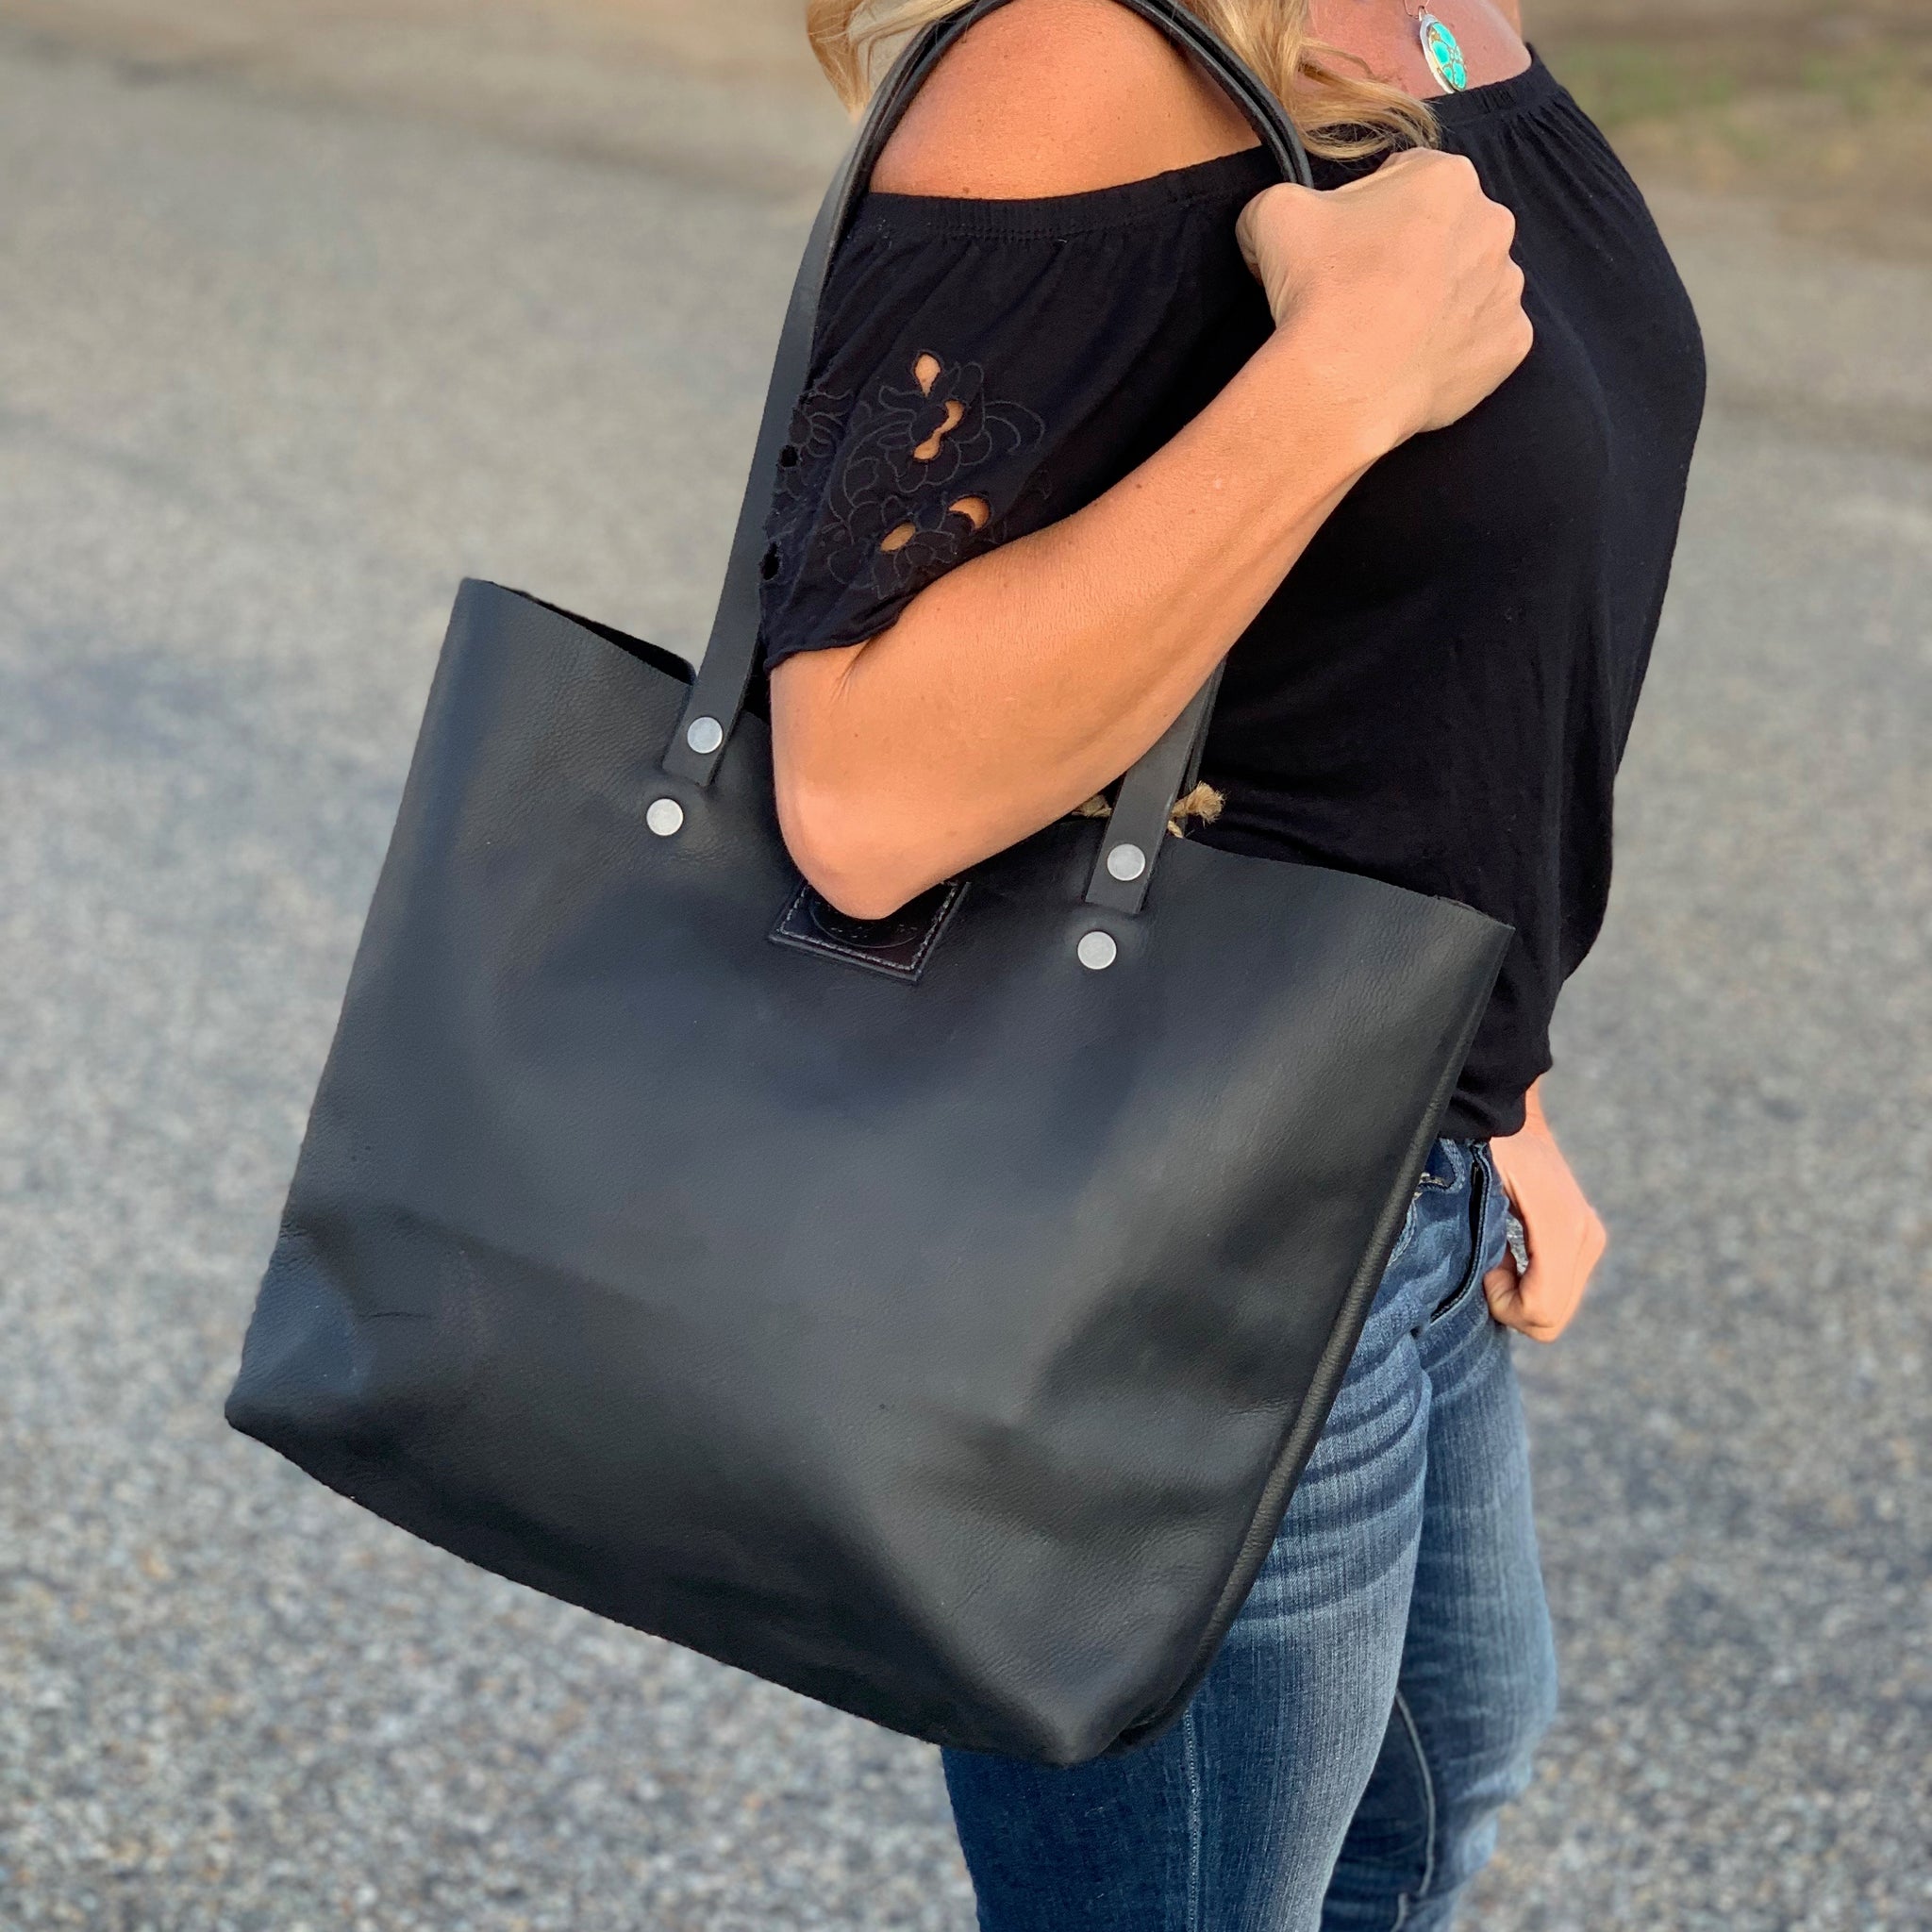 New and used Black Purses for sale | Facebook Marketplace